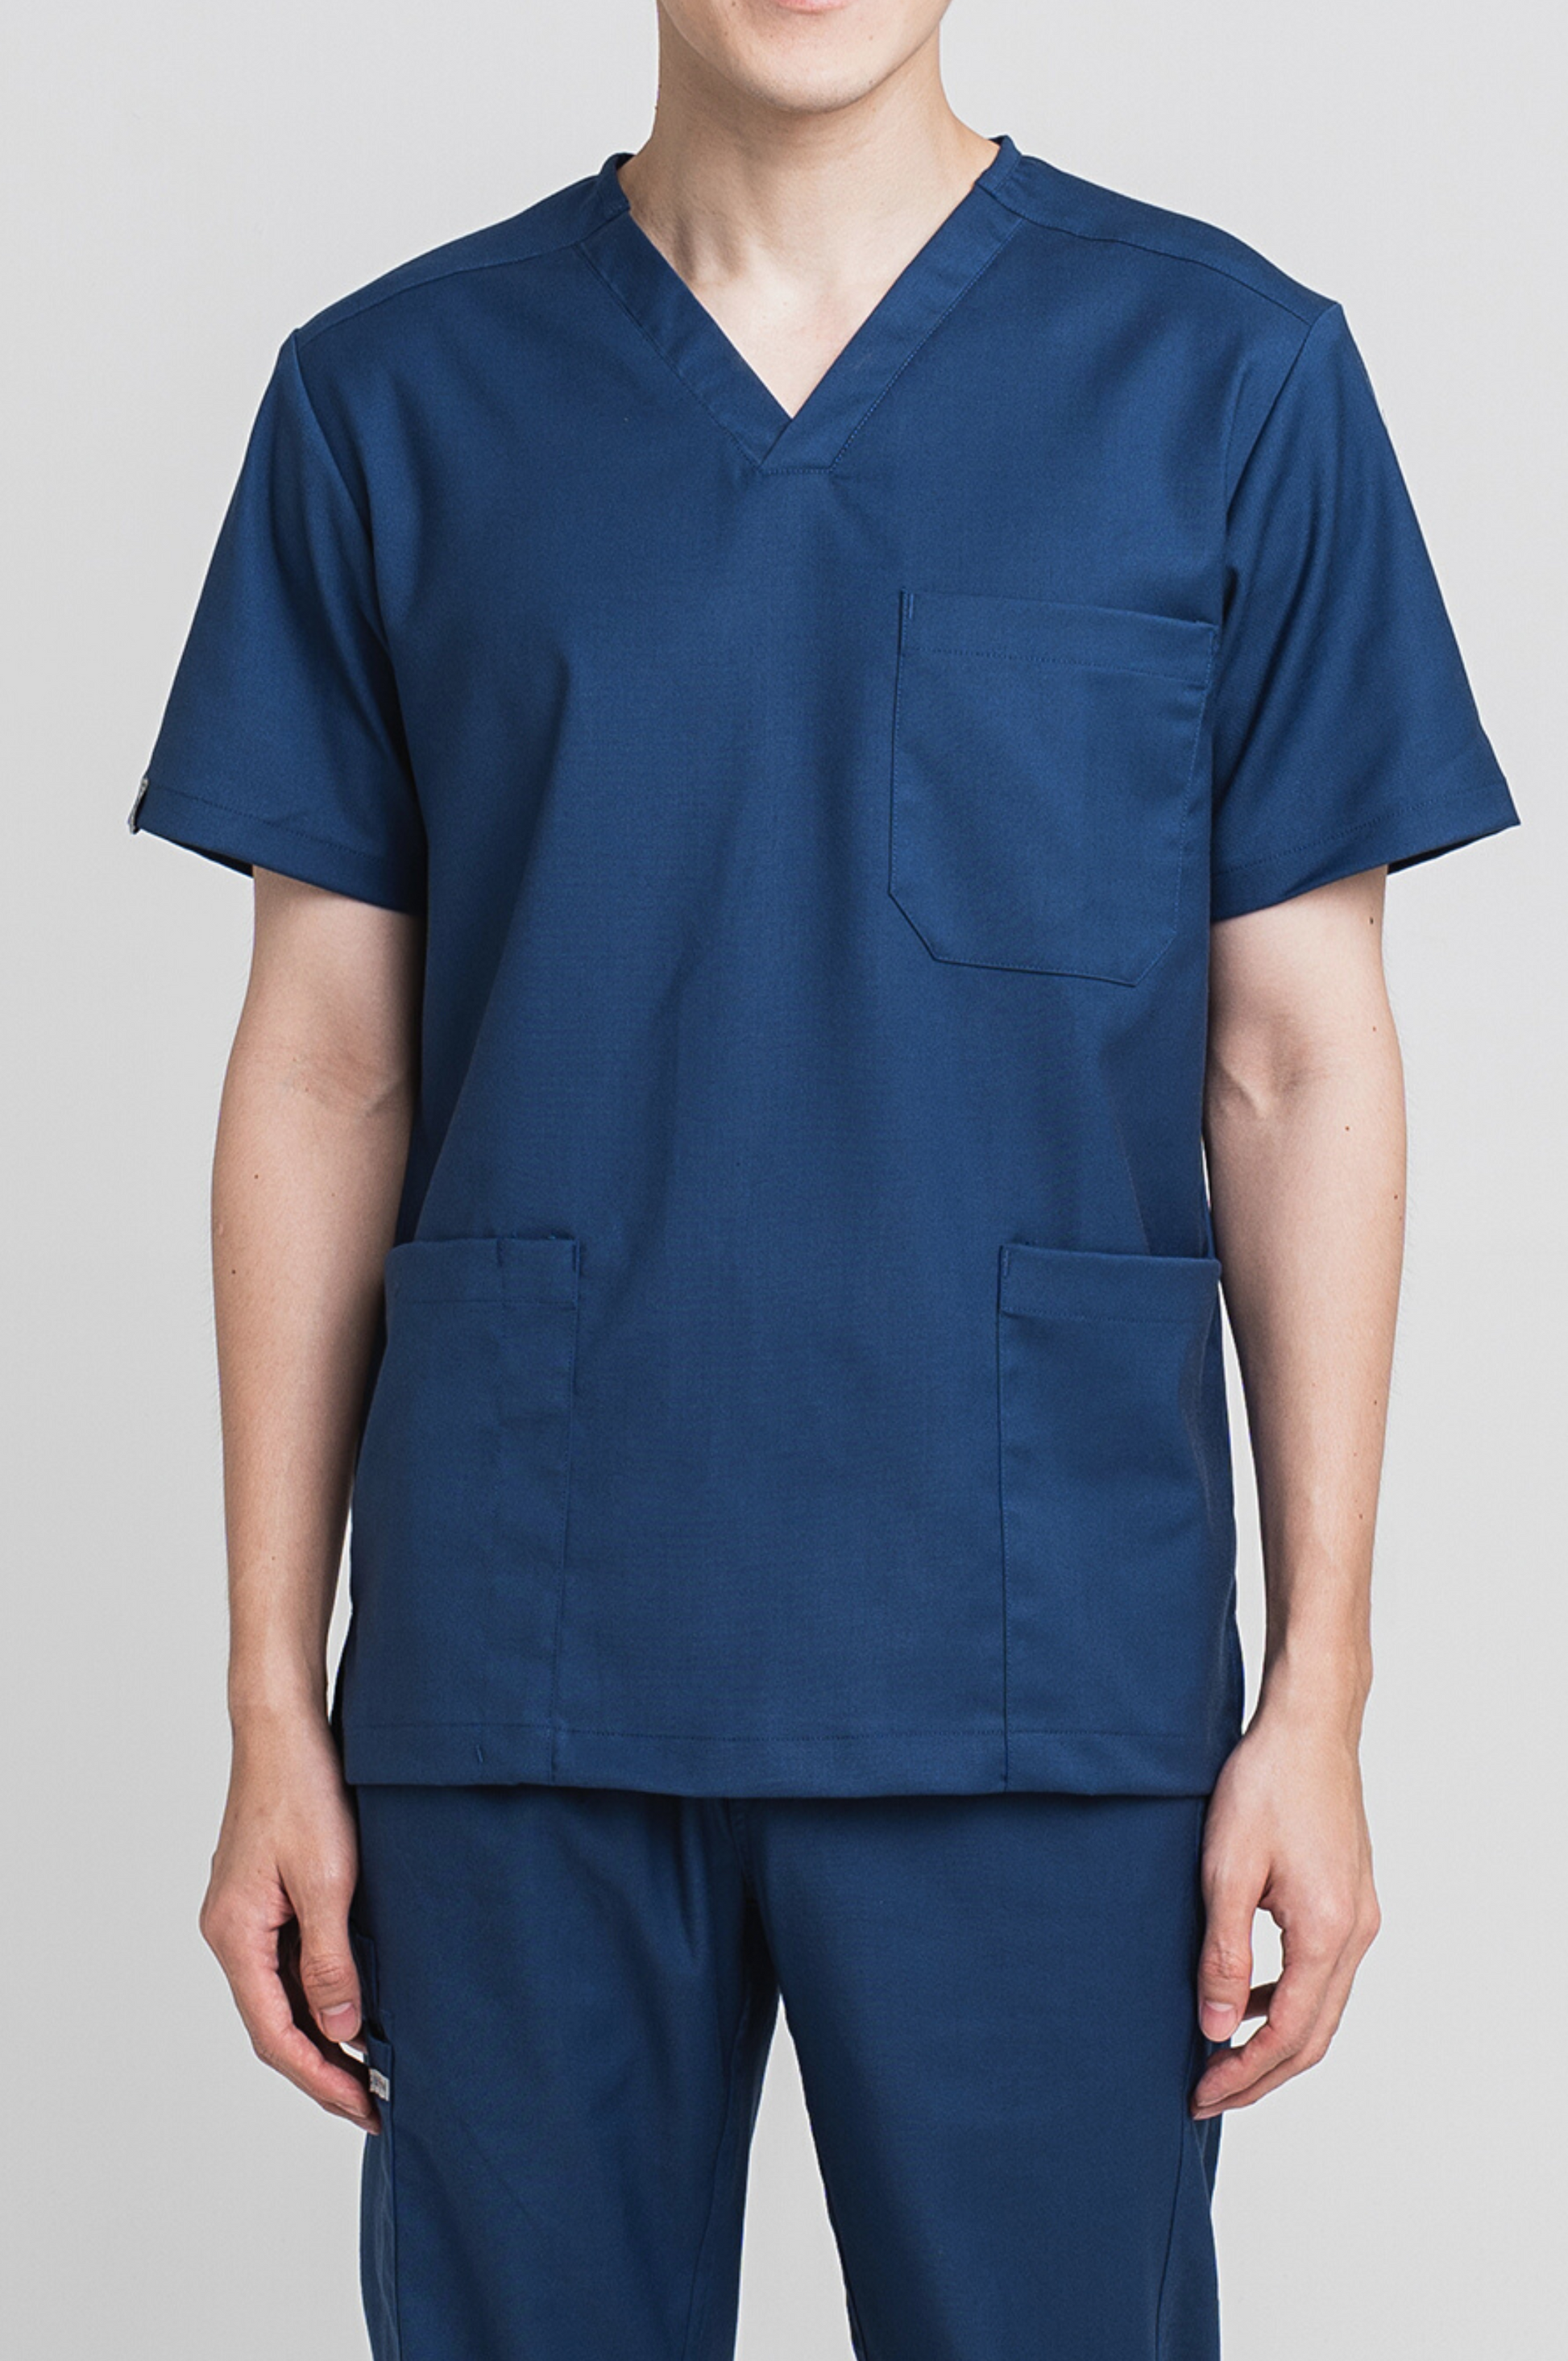 Blue Medical Scrub Top, Front View